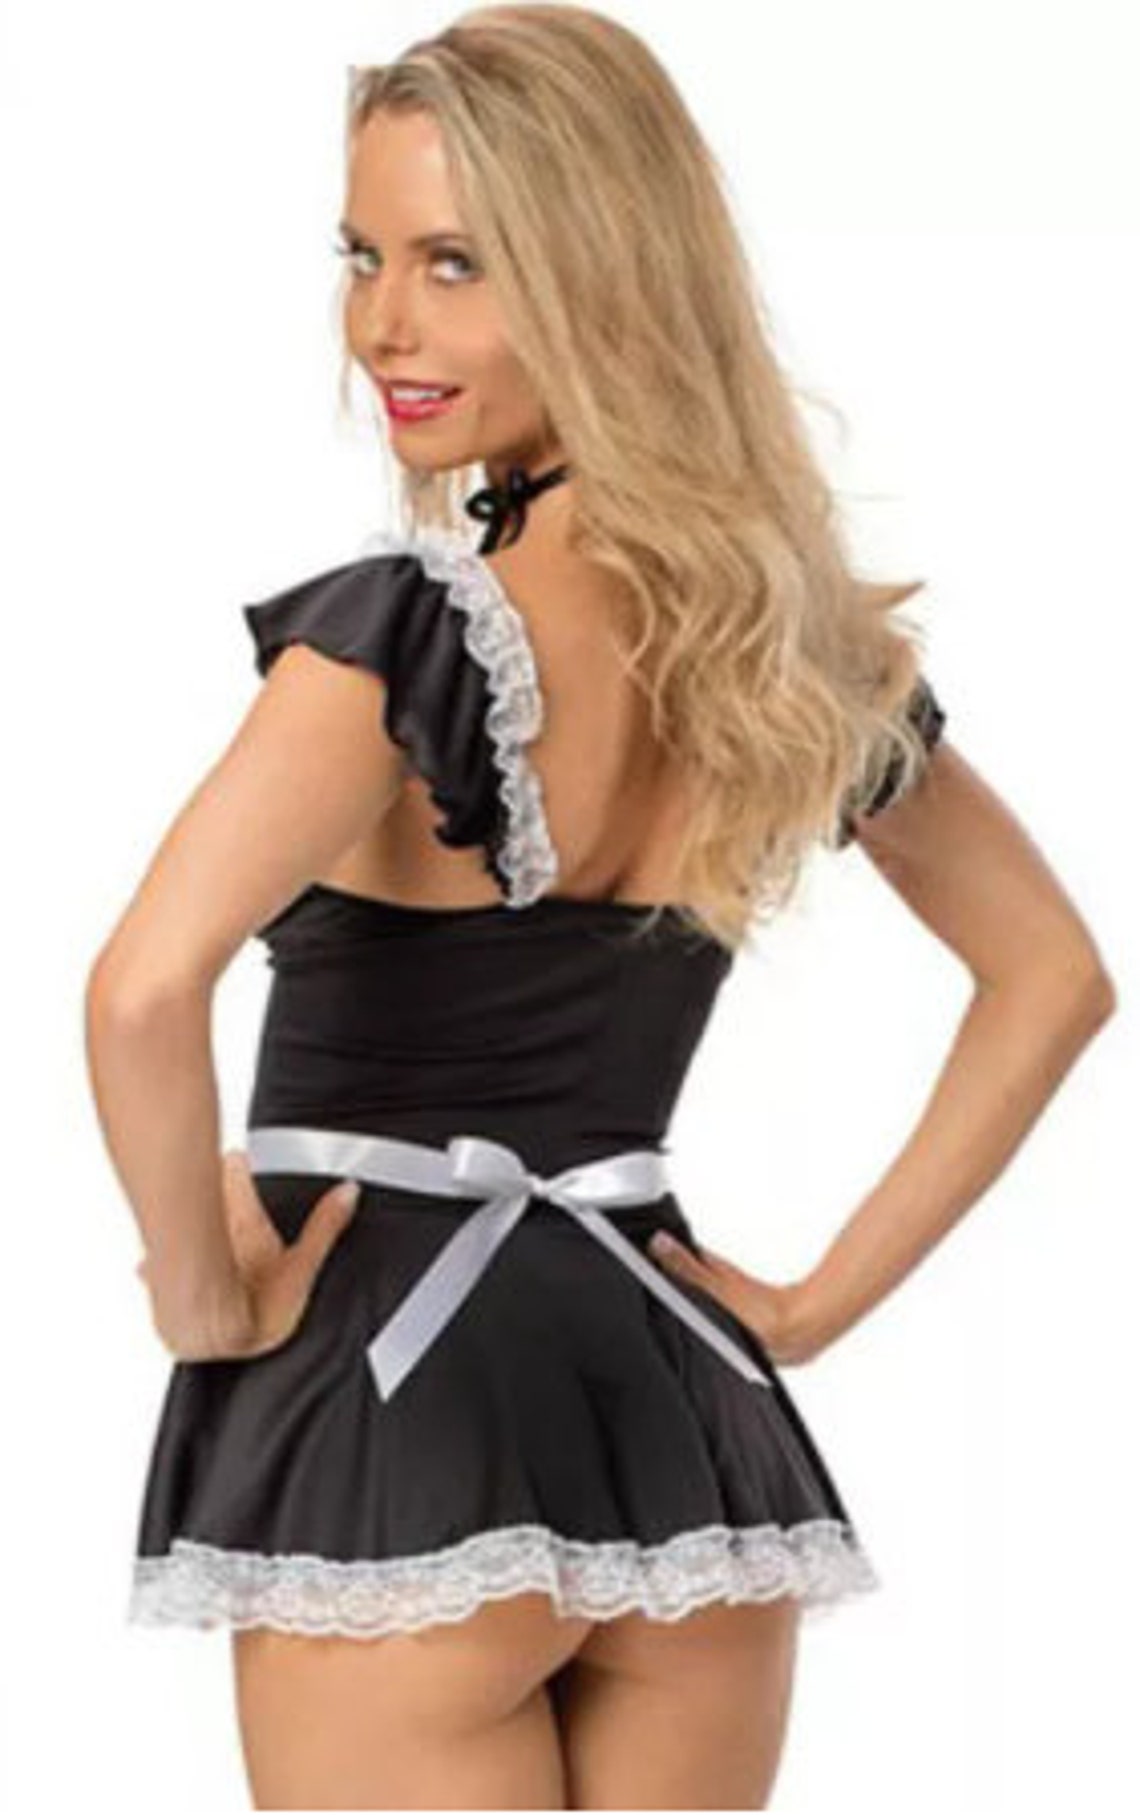 Naughty Maid Costume Maid Costume Roleplay Costume Woman Lingerie Lingerie For Women Sexy